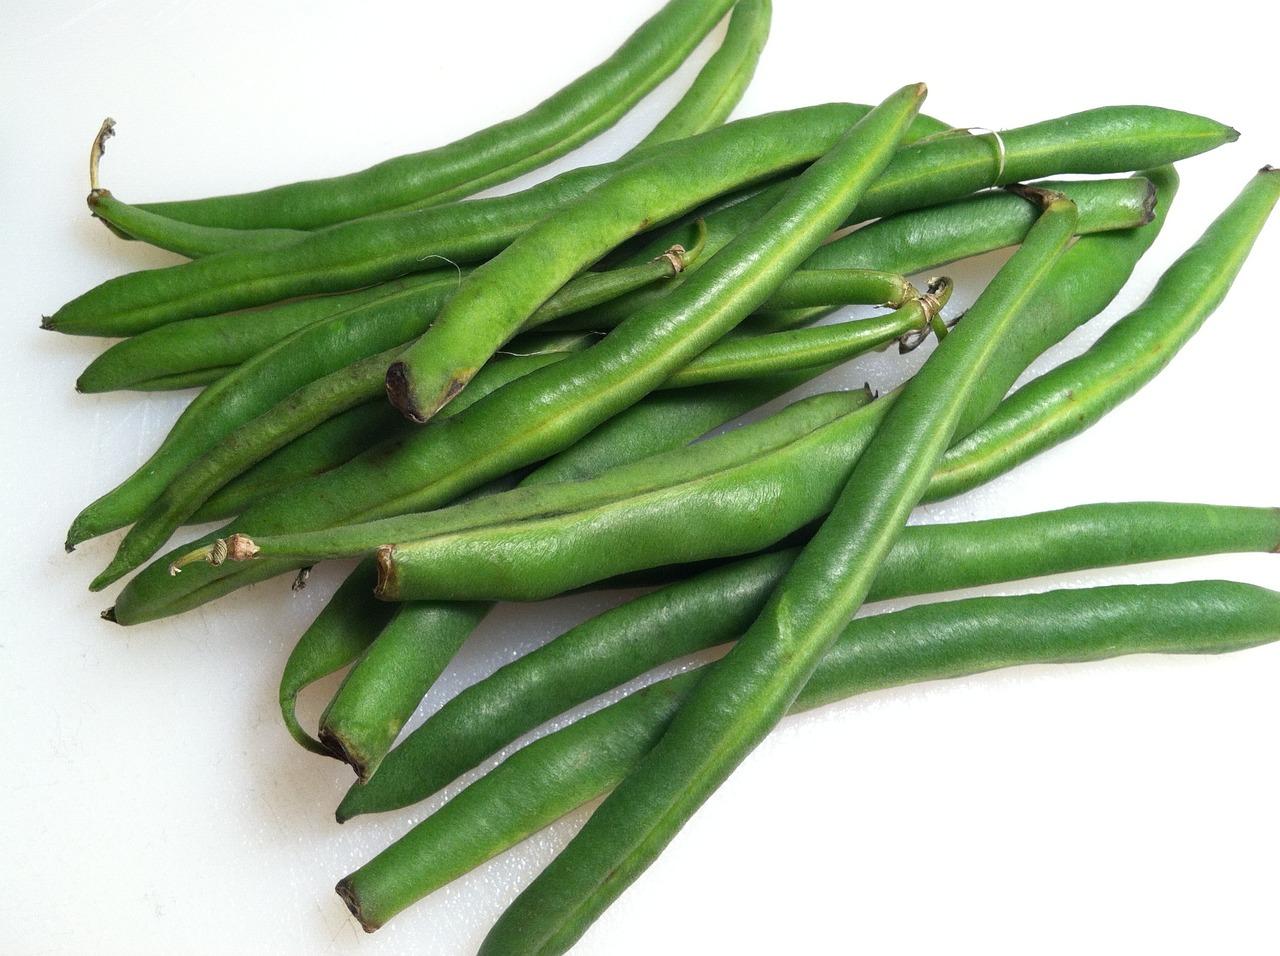 How much is a quart of green beans? 